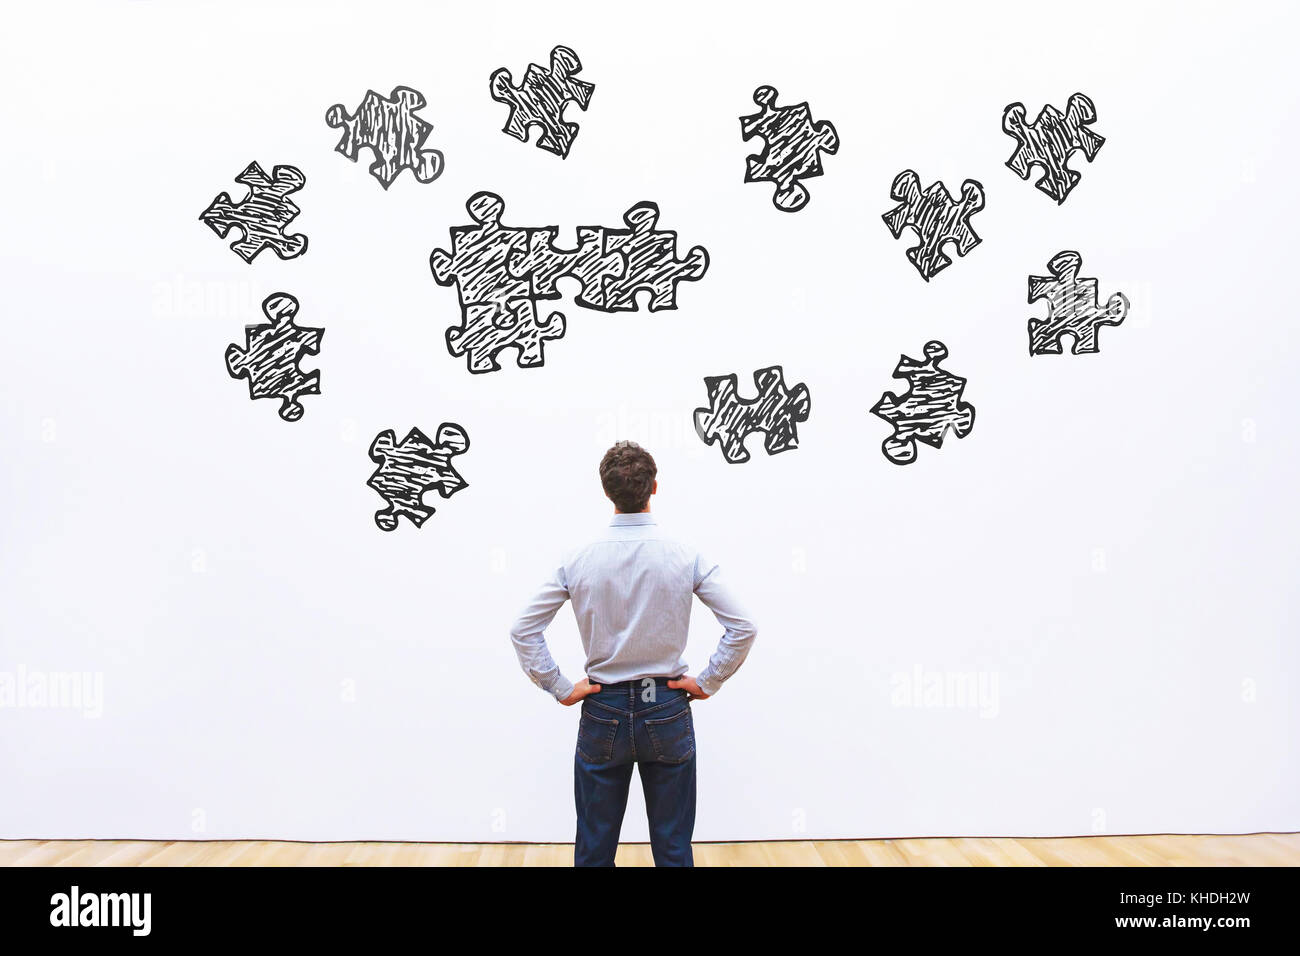 puzzle assembly, business concept Stock Photo